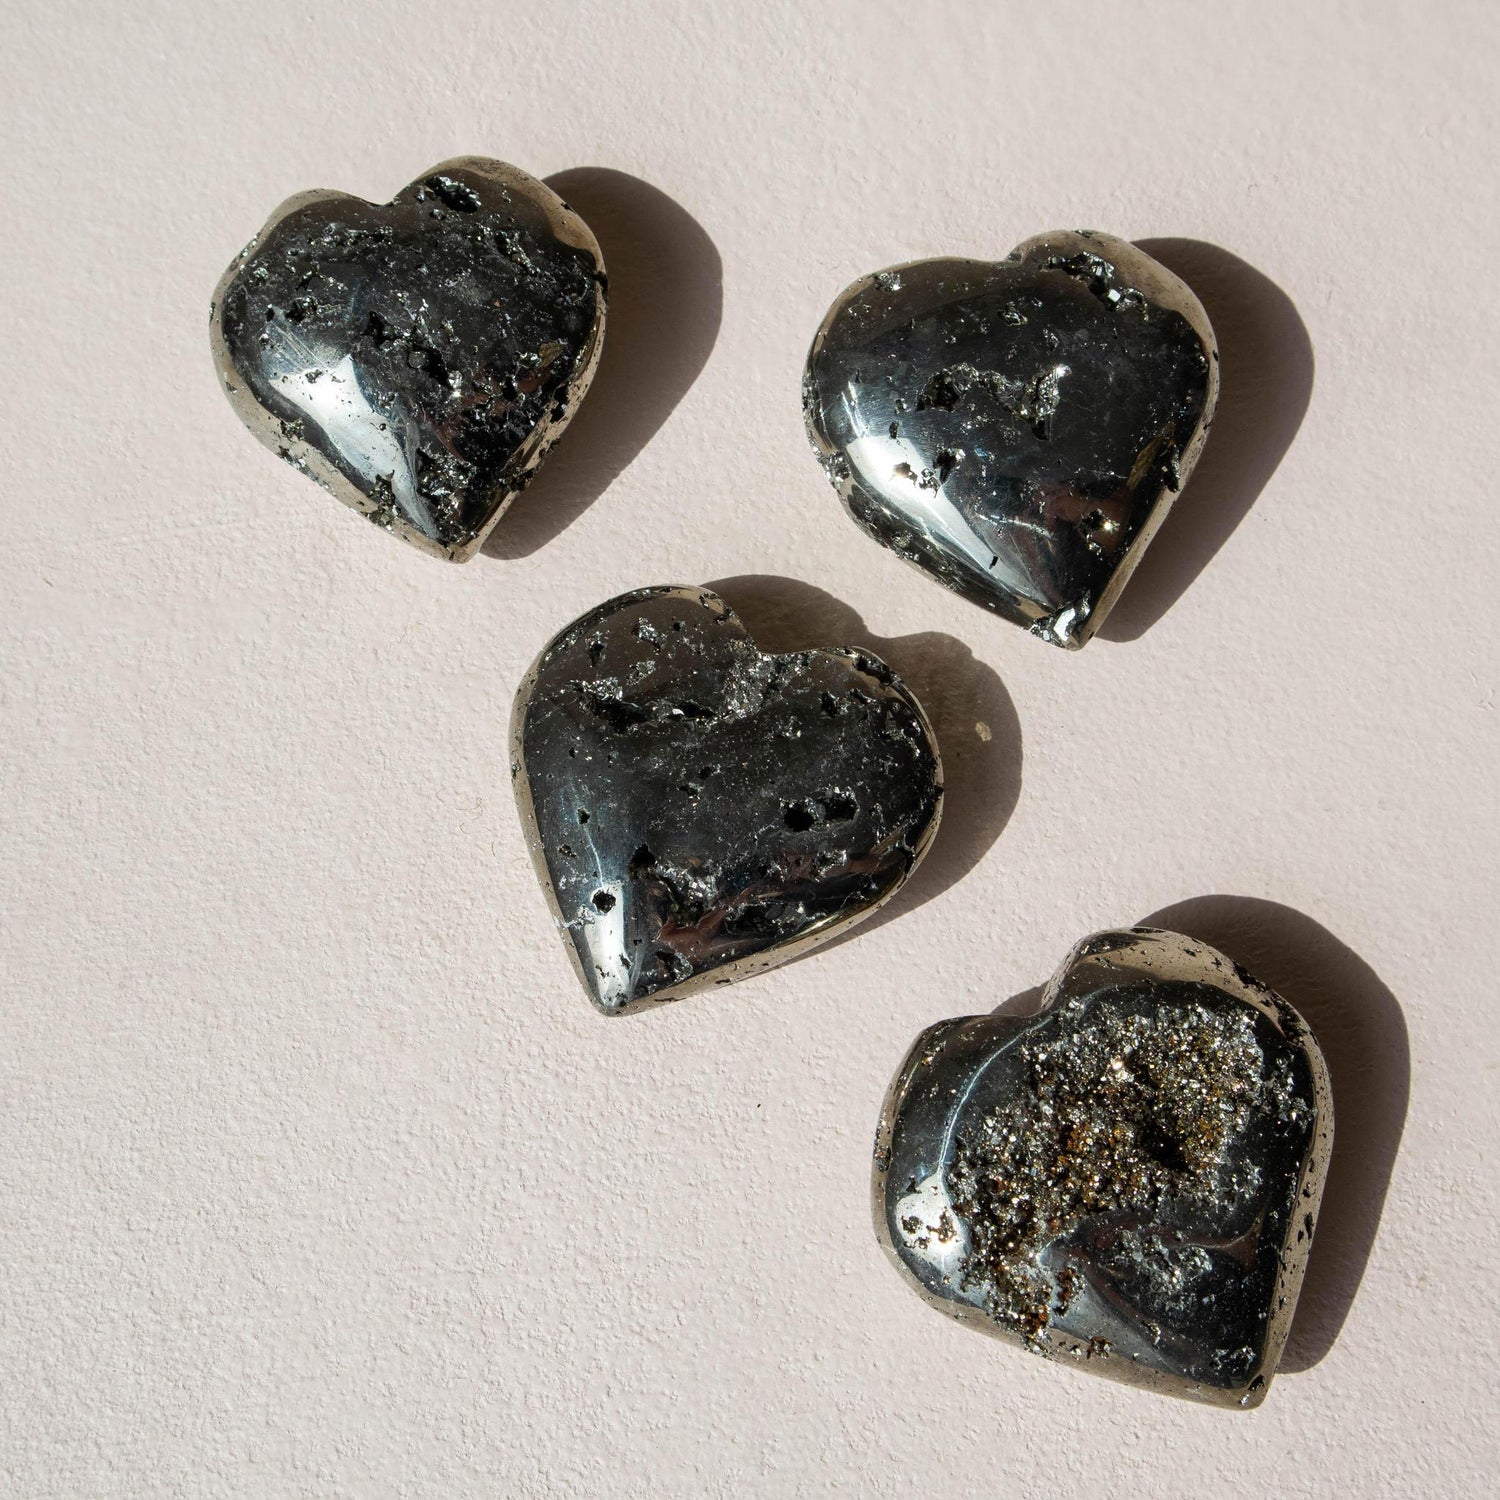 pyrite, pyrite heart, crystal heart, pyrite crystal, pyrite stone, pyrite properties, pyrite healing properties, pyrite metaphysical properties, pyrite meaning